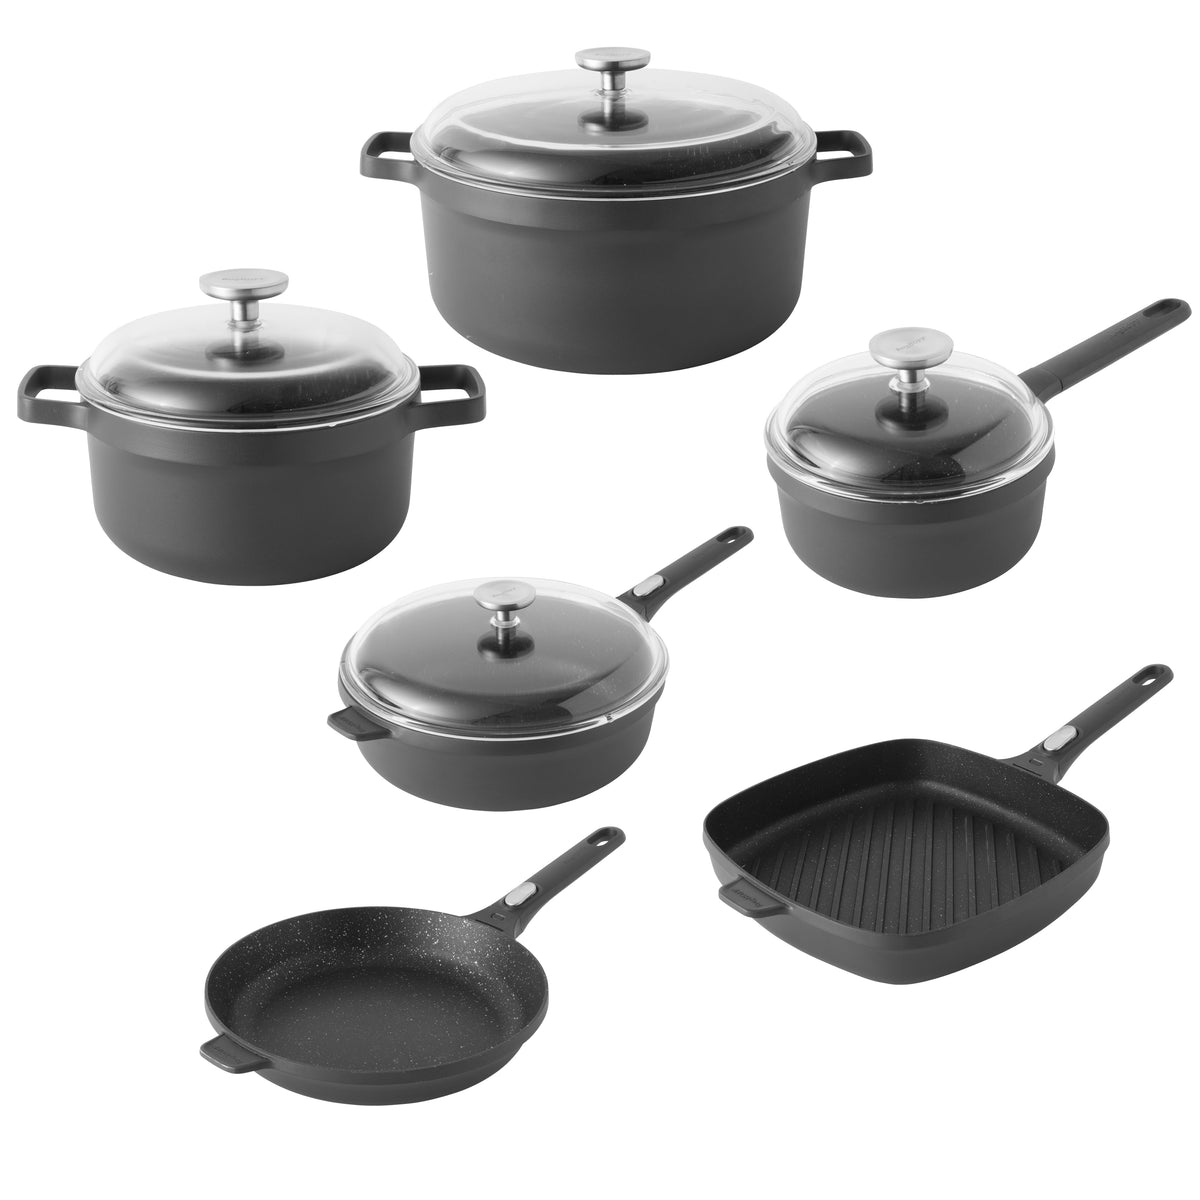 BergHOFF GEM 5Pc Non-stick Cookware Set, Best for Glass Top Cooktop and Gas  Stove